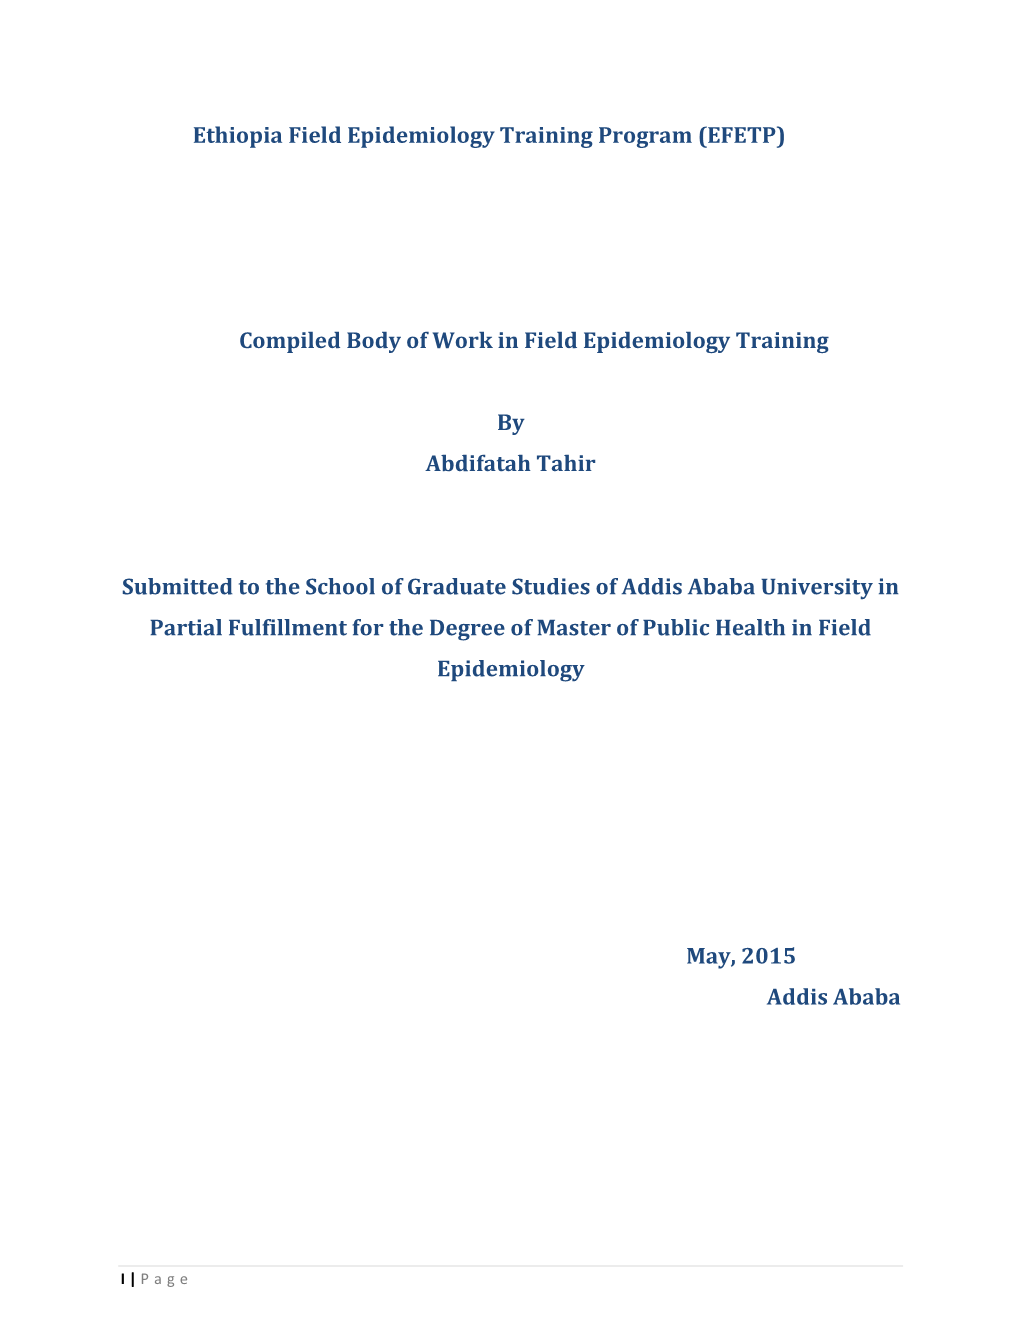 Compiled Body of Work in Field Epidemiology Training by Abdifatah